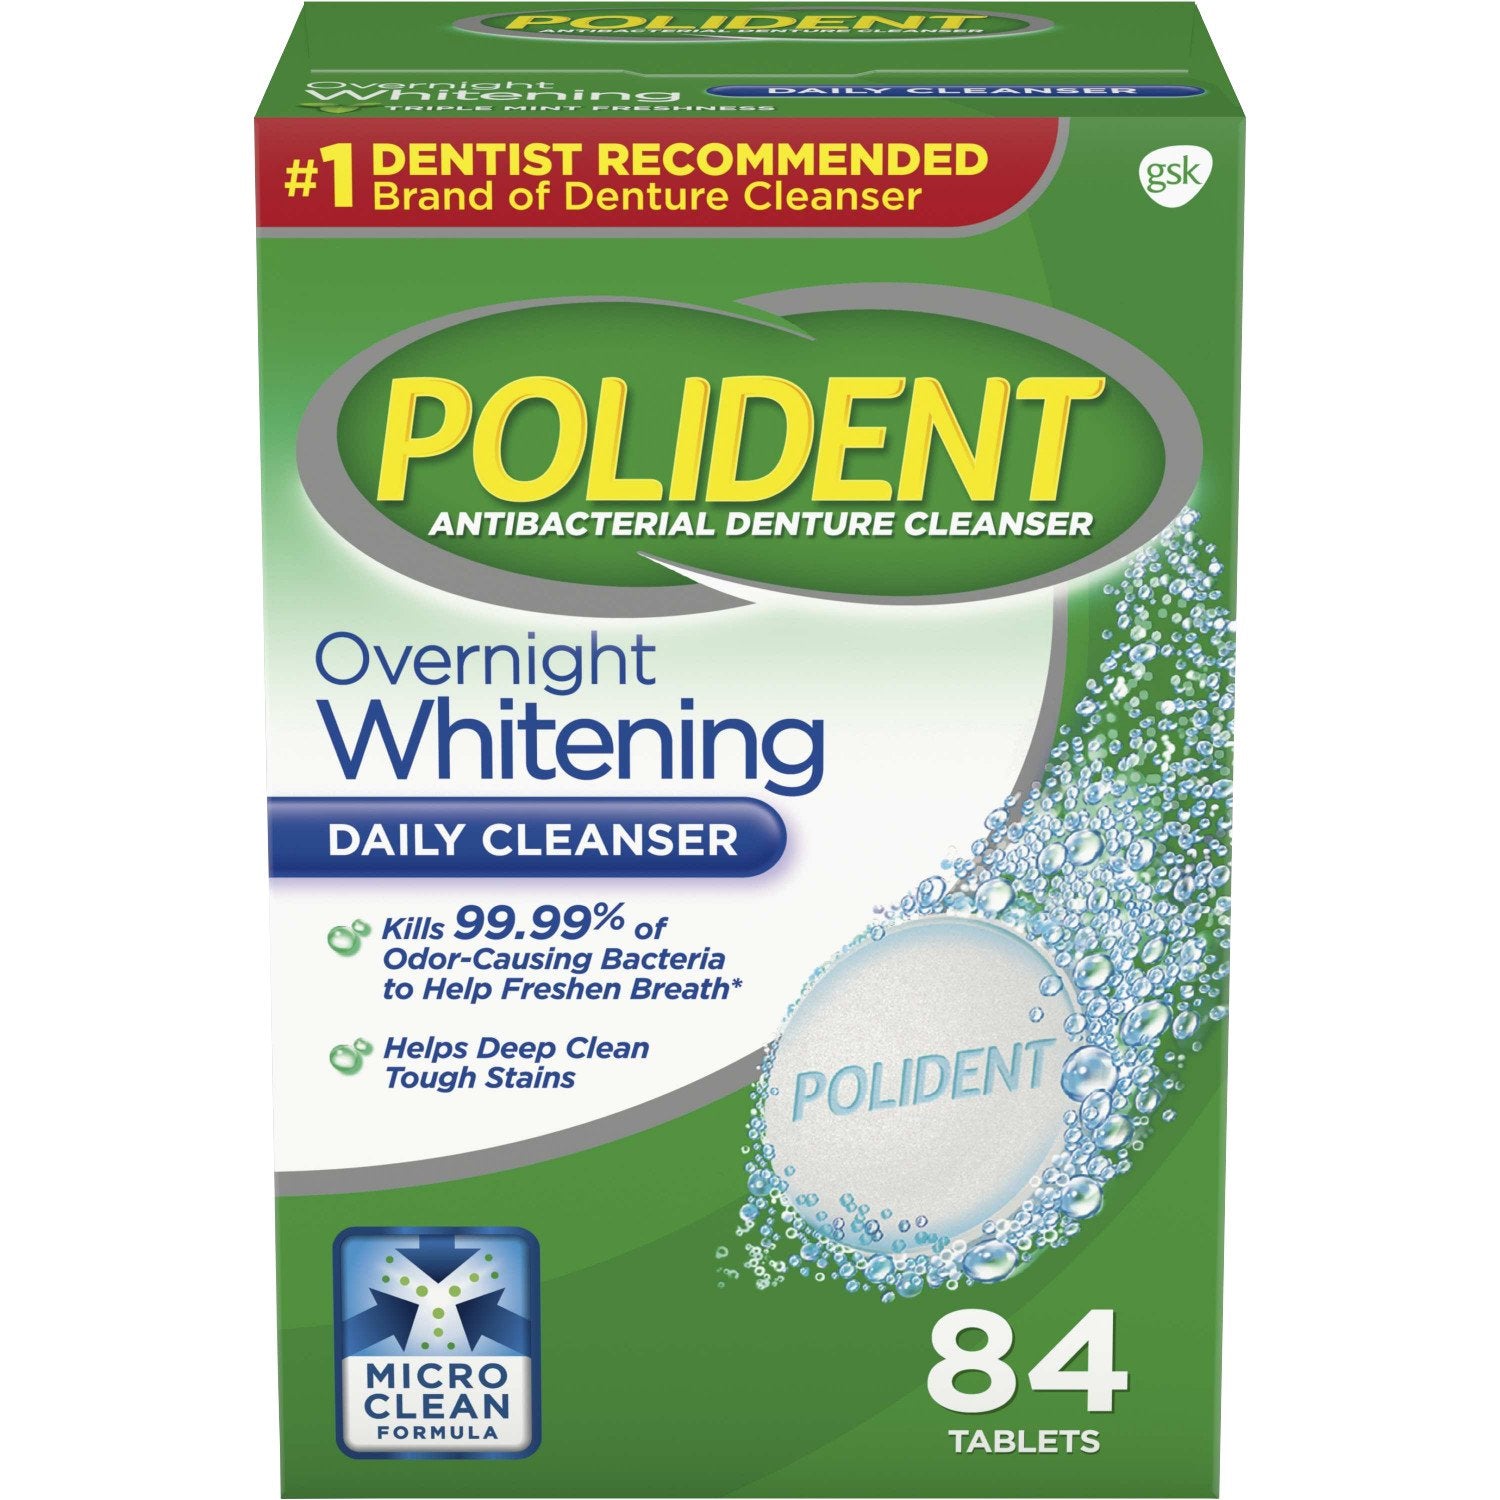 Polident Overnight Whitening Antibacterial Denture Cleanser Tablets 84 CT